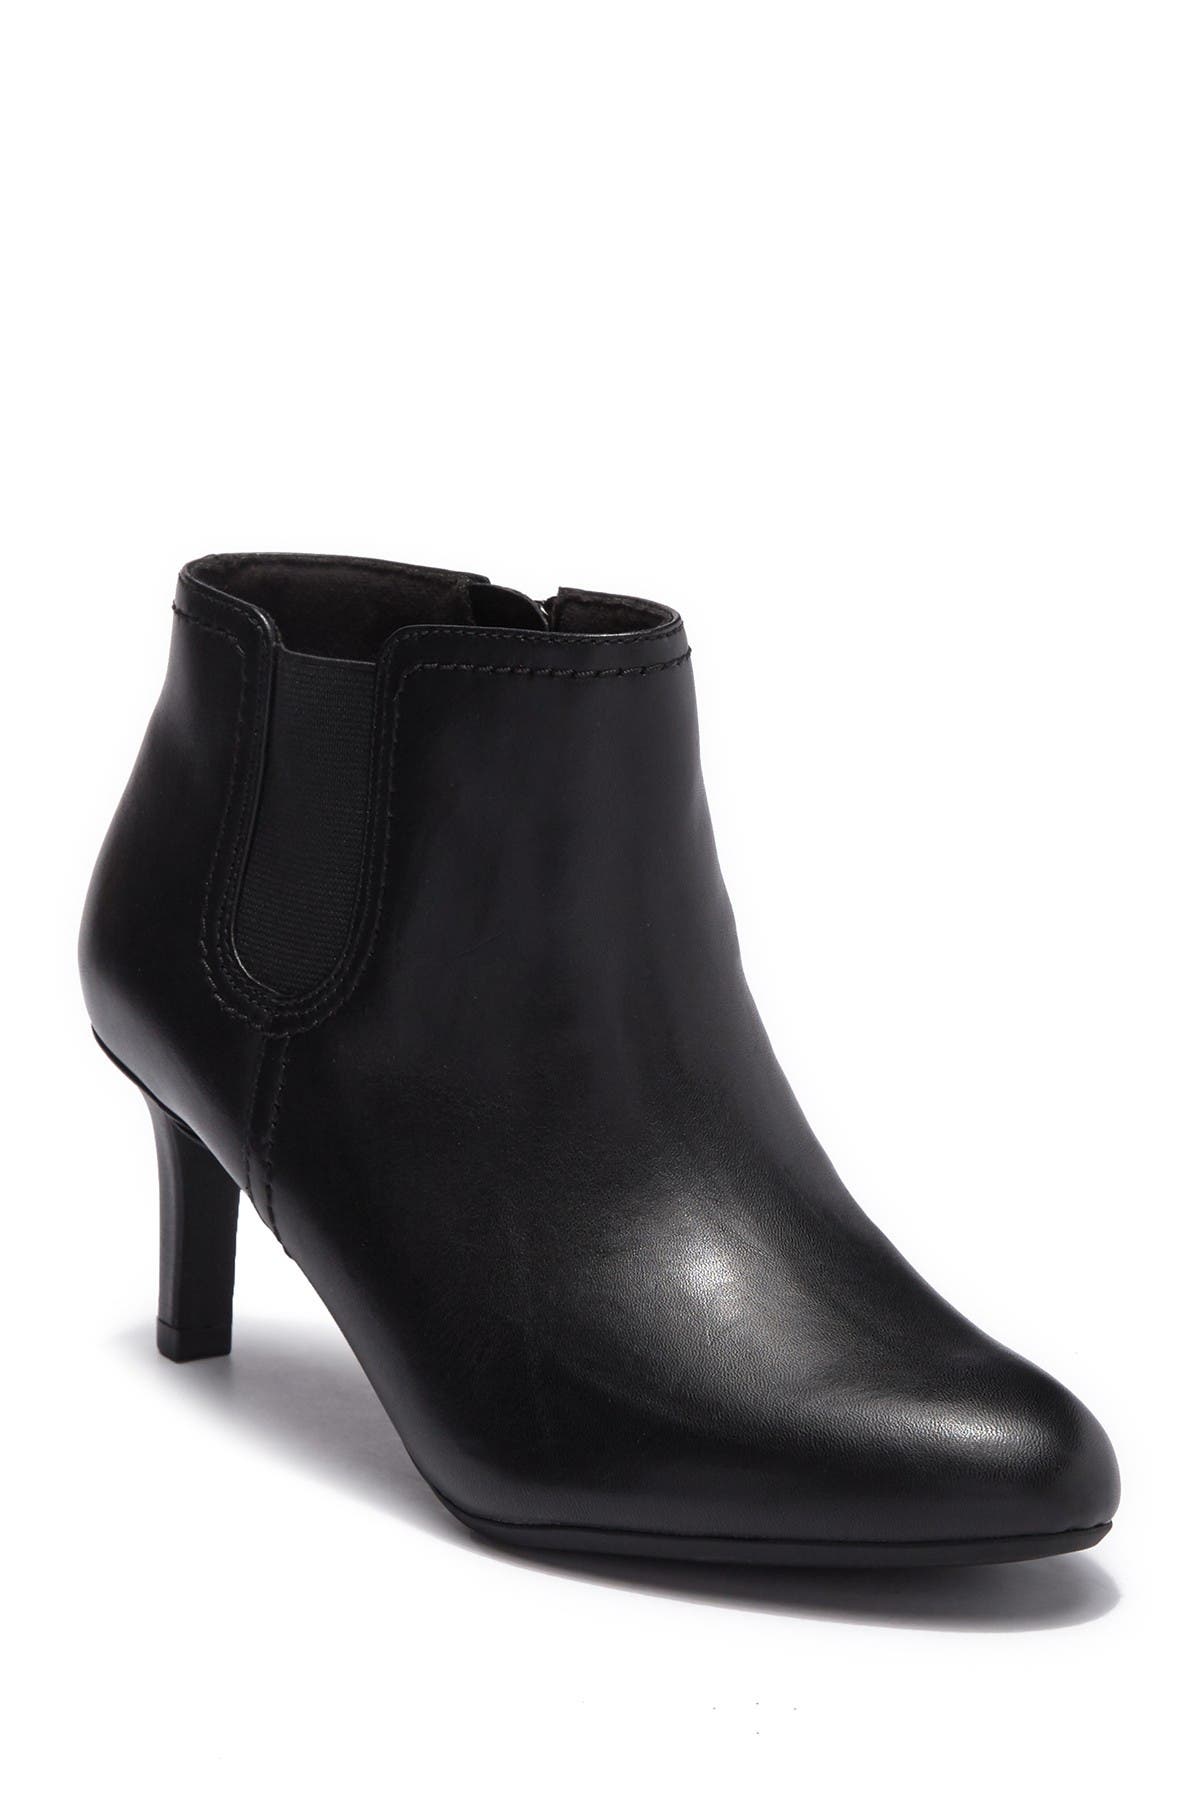 clarks dancer sky leather ankle bootie